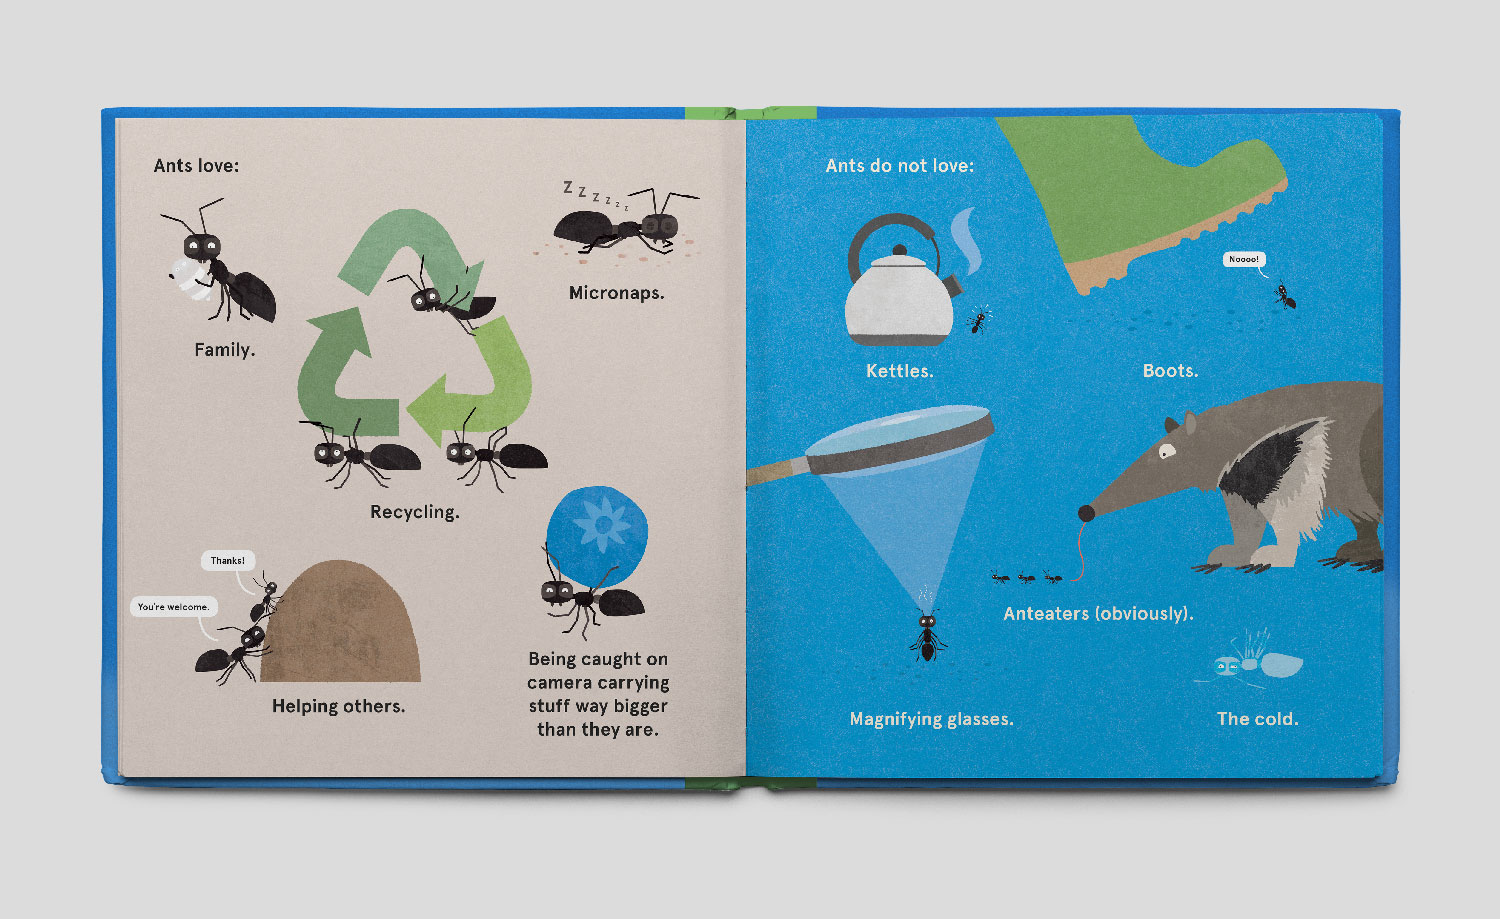 Illustrations of ant activities